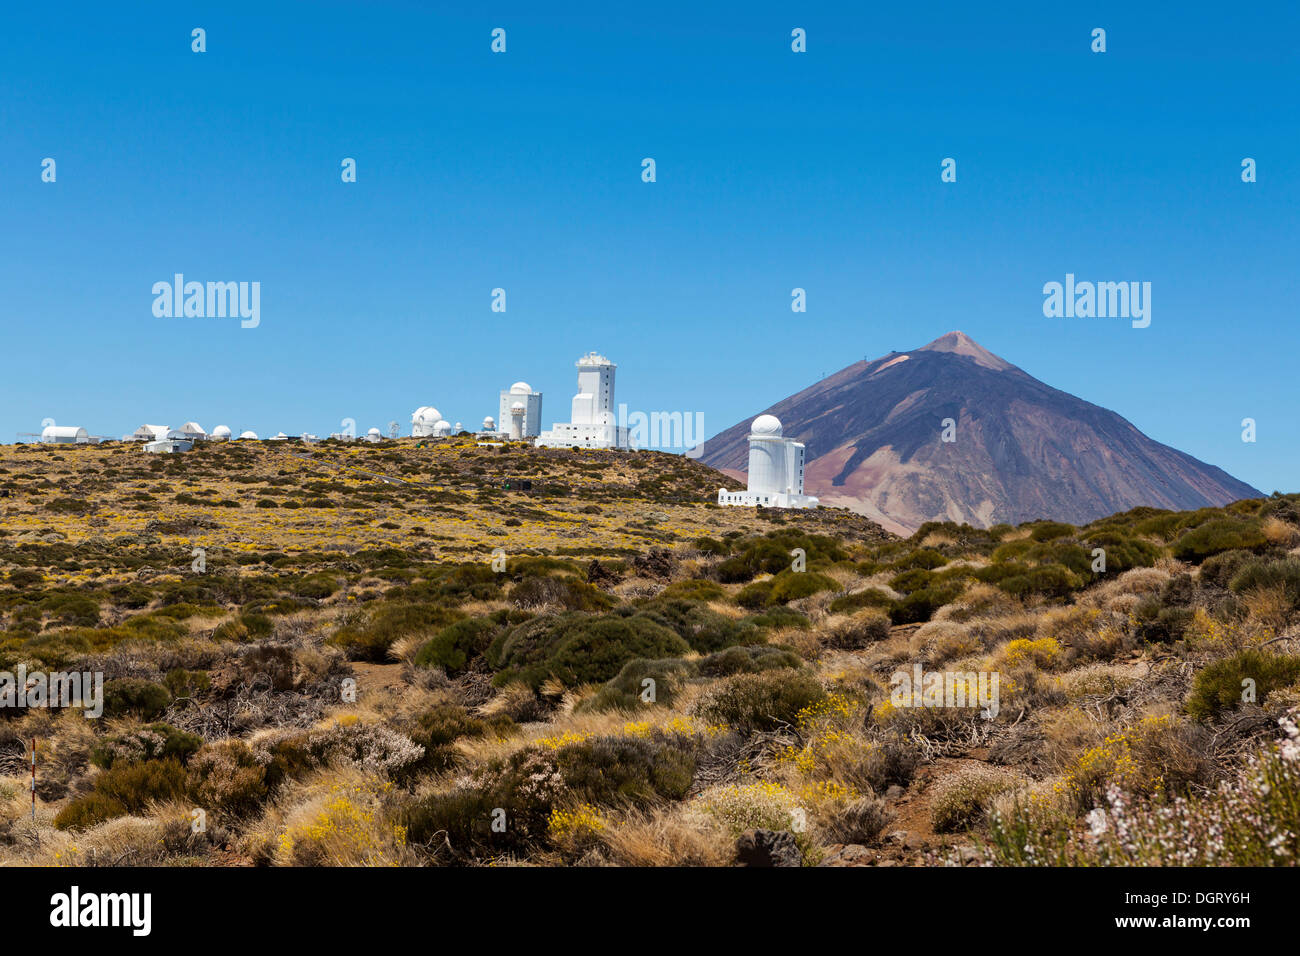 Observatorio del Teide, observatory in the Teide National Park, UNESCO World Heritage Site, Mount Teide volcano at back Stock Photo